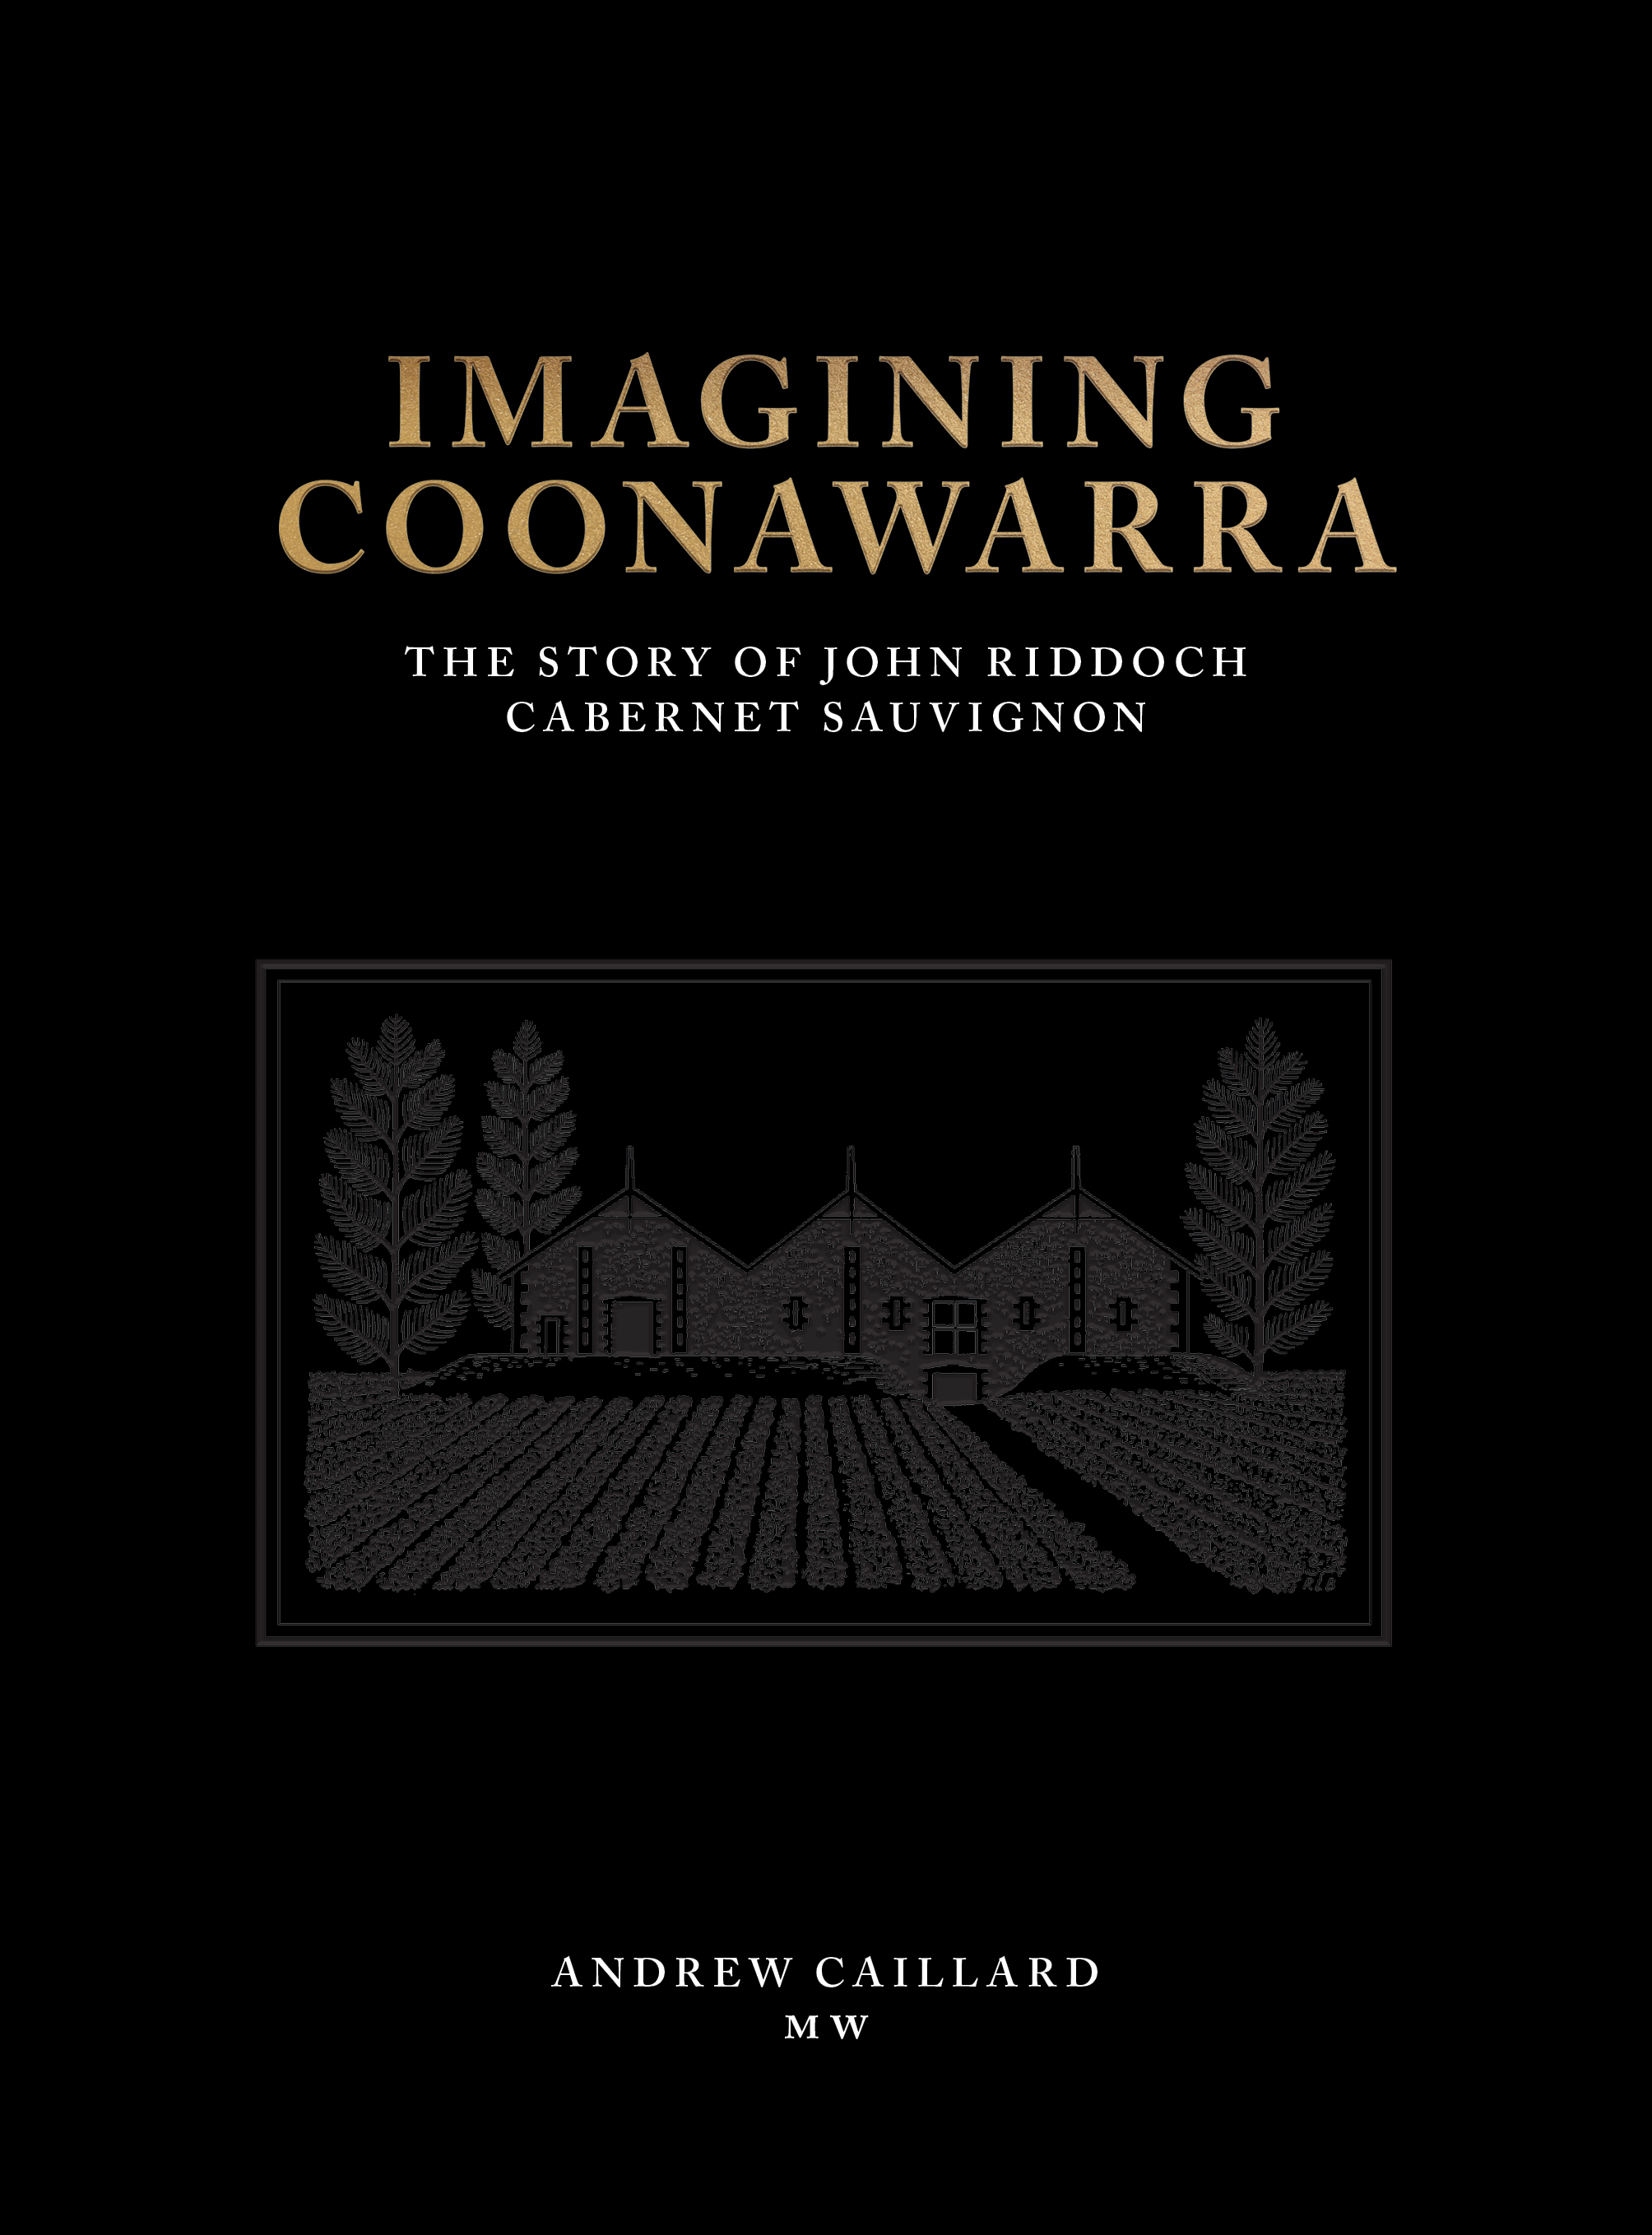 Coonawarra pioneer, John Riddoch, immortalised to celebrate International Cabernet Day as popularity of Cabernet Sauvignon continues to soar.